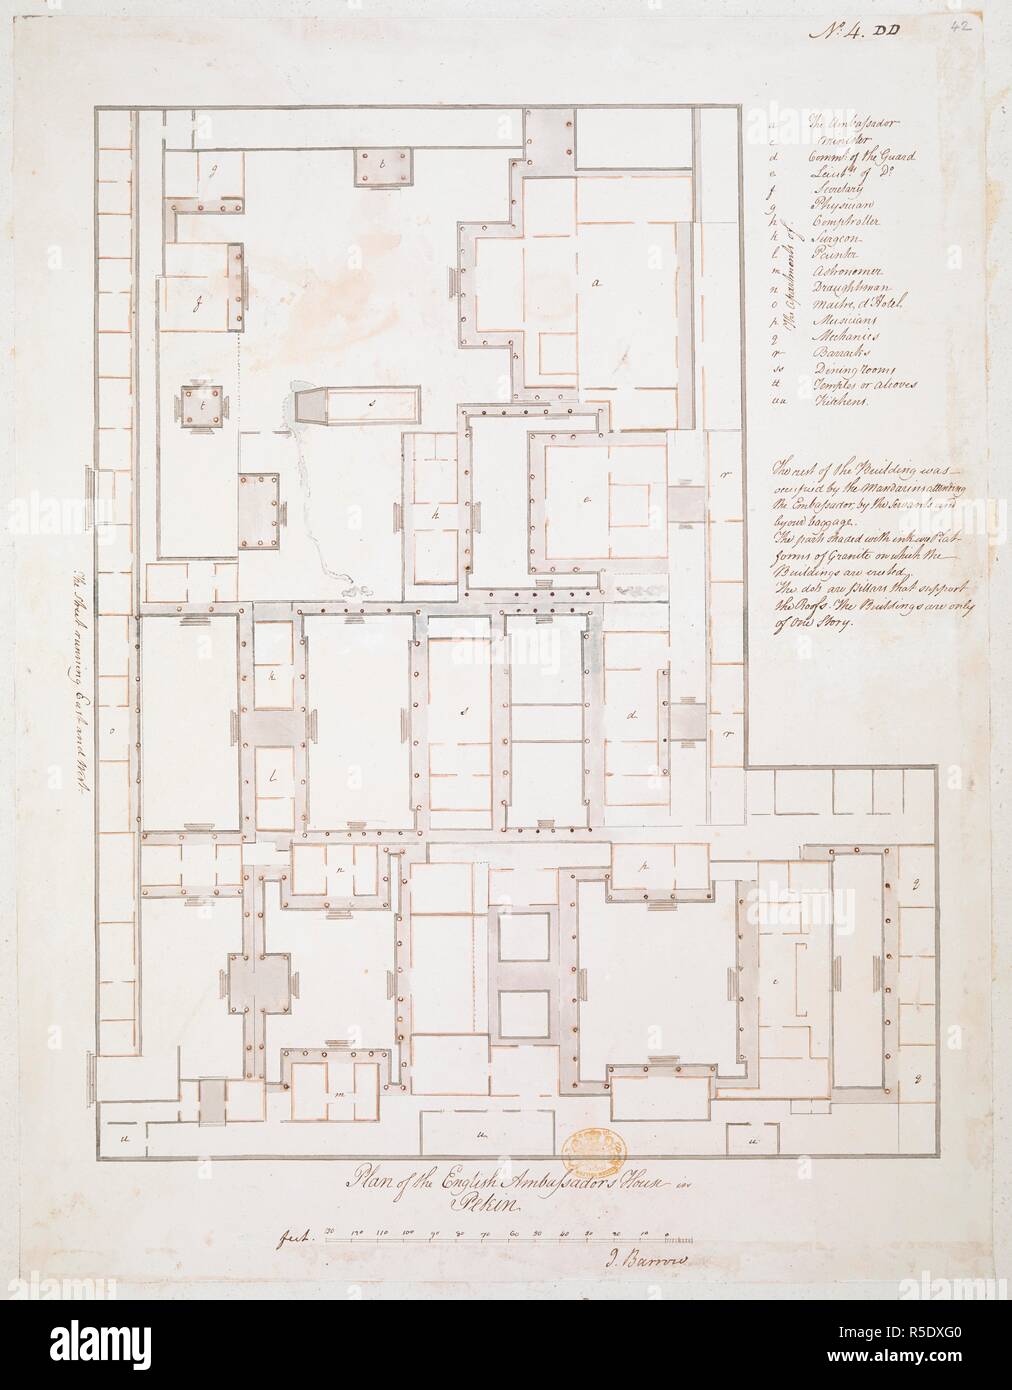 A plan of the English Embassador's (Lord Macartney's) house in Pekin; drawn by Sir John Barrow, Bart., on a scale of 30 feet to an inch.  . A collection of eighty views, maps, portraits and drawings illustrative of the Embassy sent to China under George, Earl of Macartney, in 1793; drawn chiefly by William Alexander, some by Sir John Barrow, Bart., some by Sir Henry Woodbine Parish, and one by William Gomm. Many of them are engraved in Sir George Staunton's Narrative of the Embassy, published in 1797. 1793-1794. Ms. 1 f. 4 in. x 1 f. 1 in.; 41 x 33 cm.; Scale 1: 360. 30 feet to an inch. Source Stock Photo